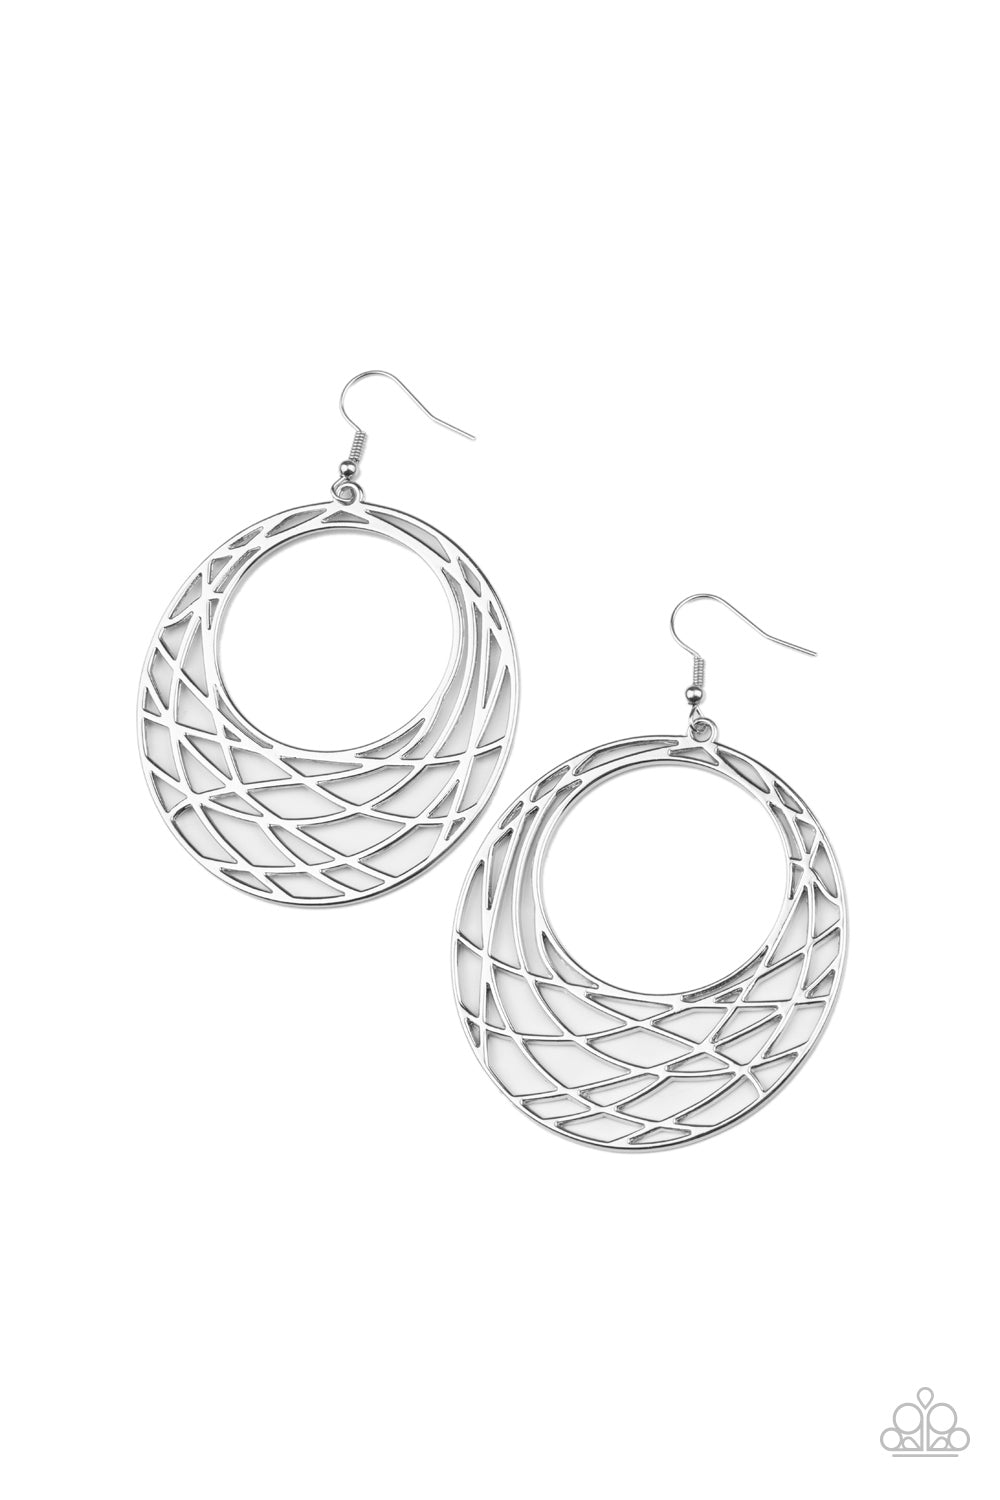 &lt;P&gt;Shimmery silver bars crisscross and overlap along the bottom of a circular frame, creating a crescent-like hoop. Earring attaches to a standard fishhook fitting. &lt;/P&gt;  

&lt;P&gt; &lt;I&gt;  Sold as one pair of earrings. &lt;/I&gt;  &lt;/P&gt;


&lt;img src=\&quot;https://d9b54x484lq62.cloudfront.net/paparazzi/shopping/images/517_tag150x115_1.png\&quot; alt=\&quot;New Kit\&quot; align=\&quot;middle\&quot; height=\&quot;50\&quot; width=\&quot;50\&quot;/&gt;